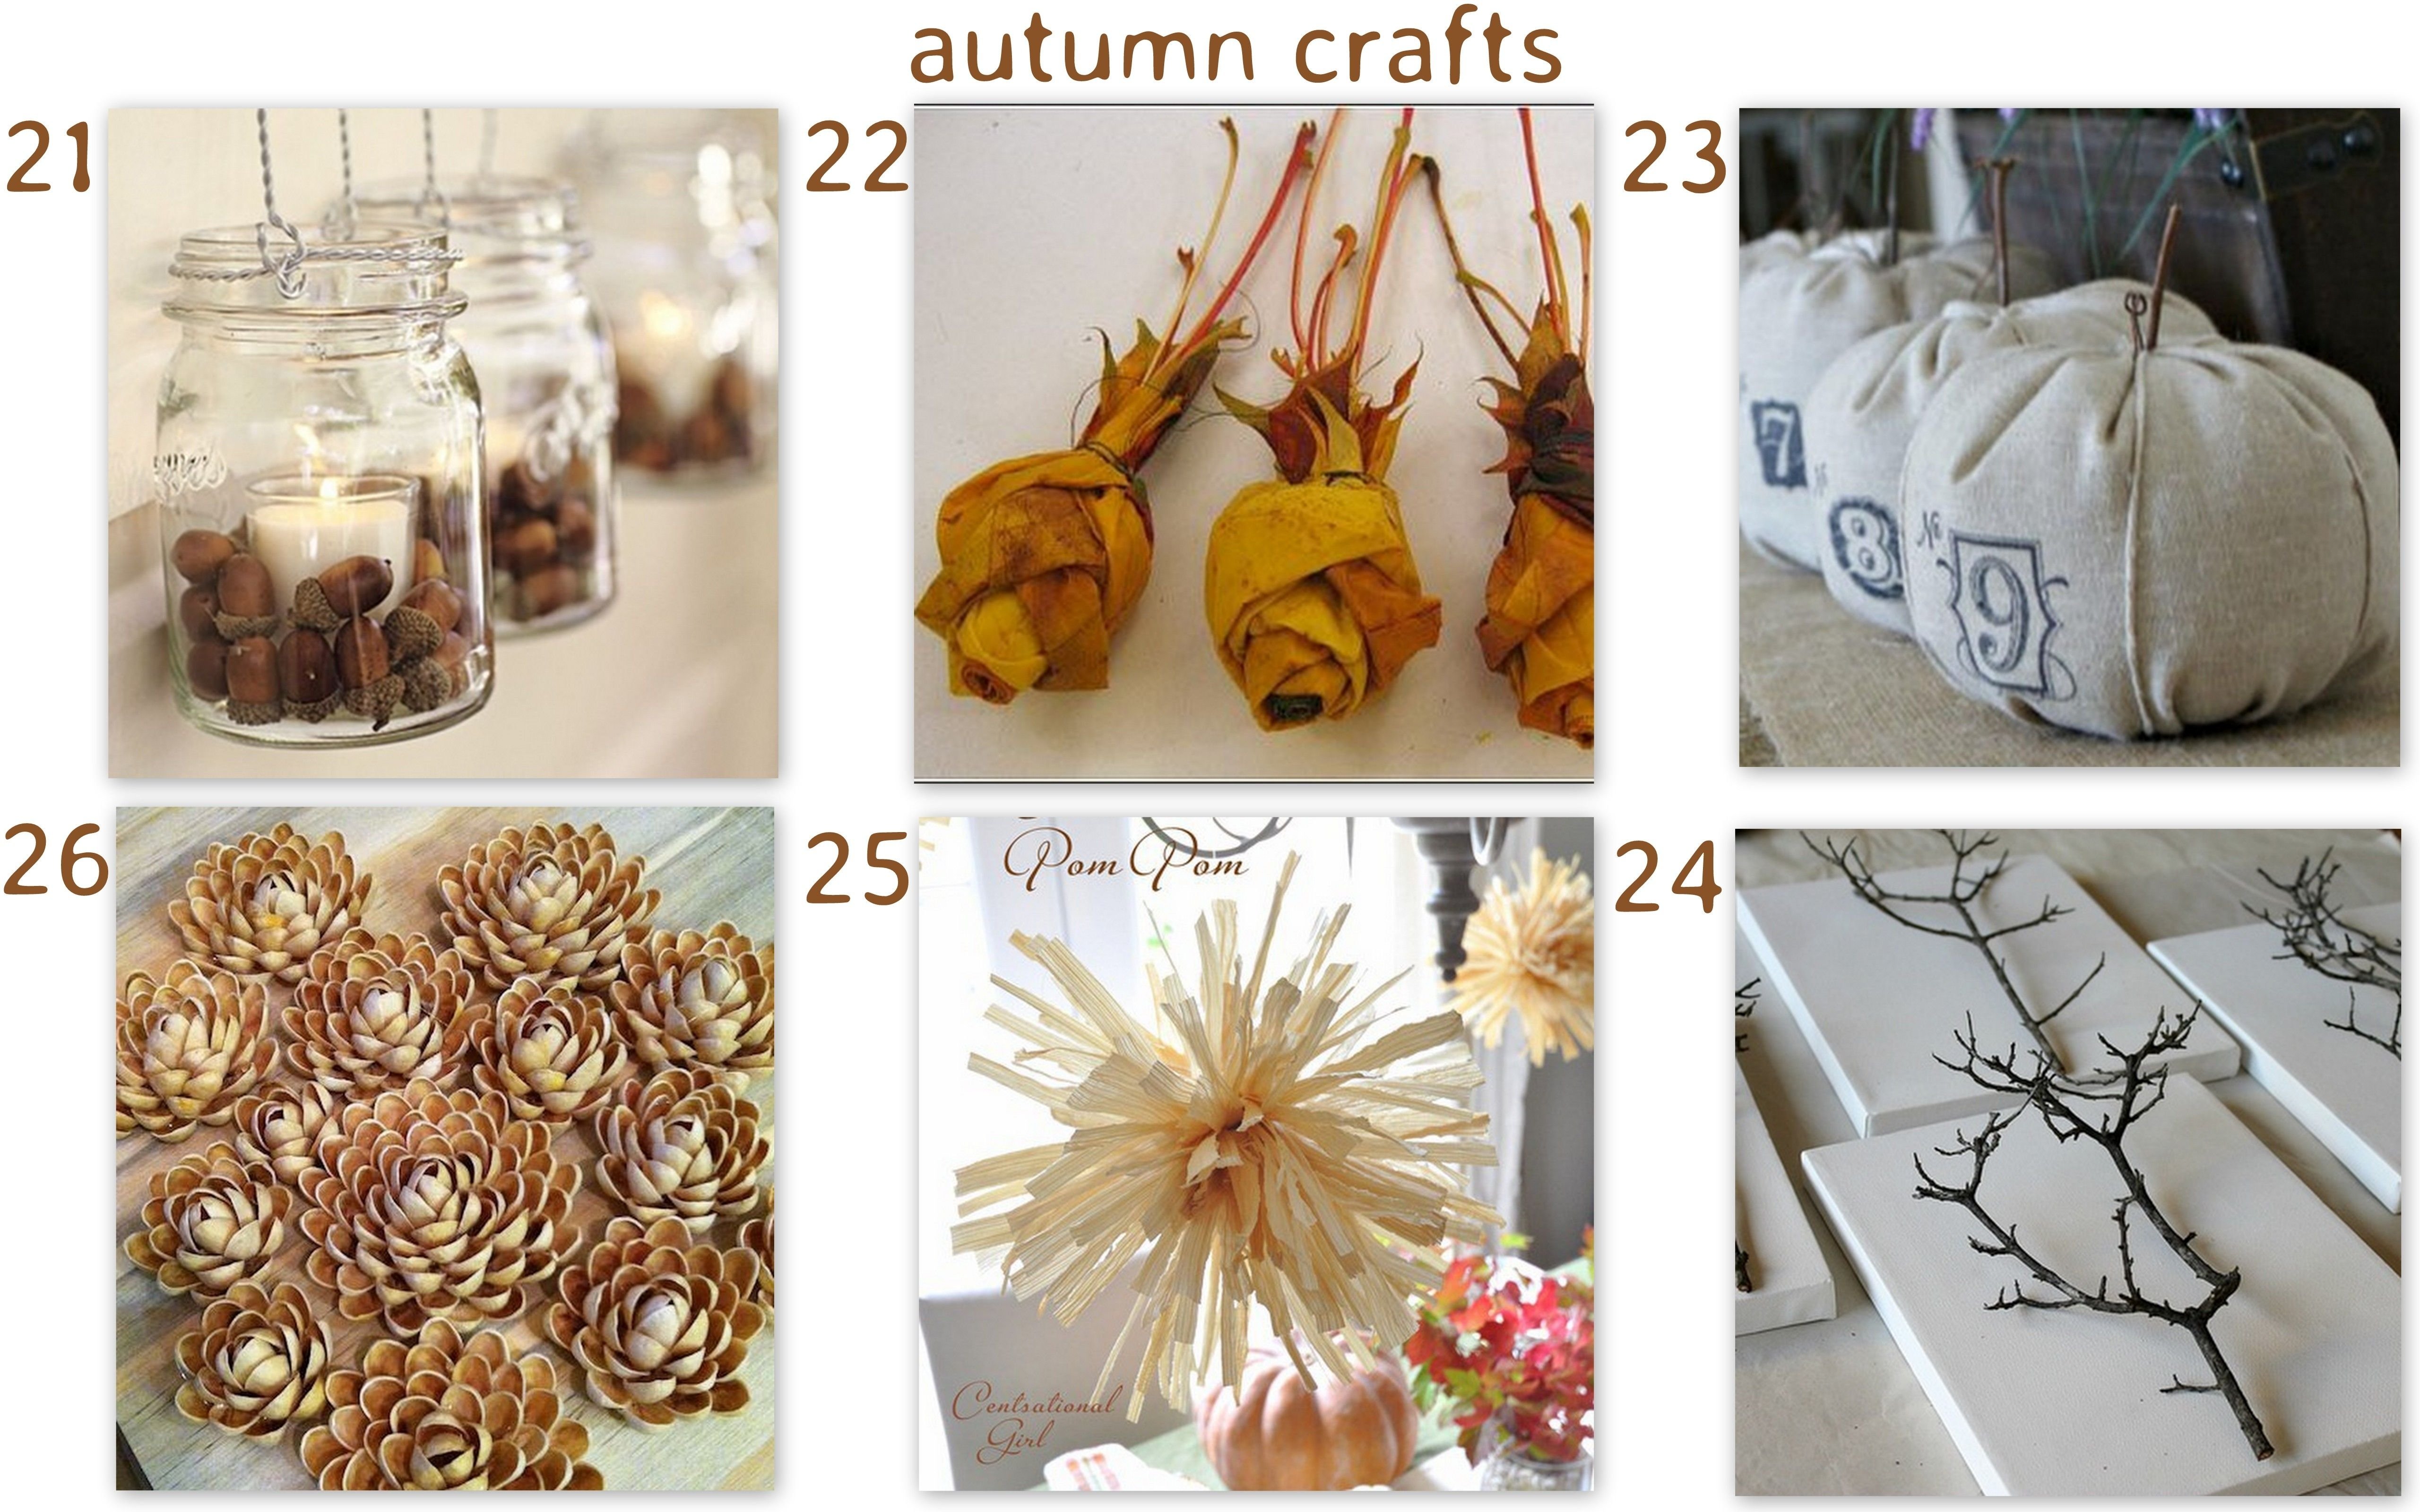 10 Lovable Fall Craft Ideas For Adults fall craft ideas autumn craft ideas toomuchtimeonmyhands crafts 2022